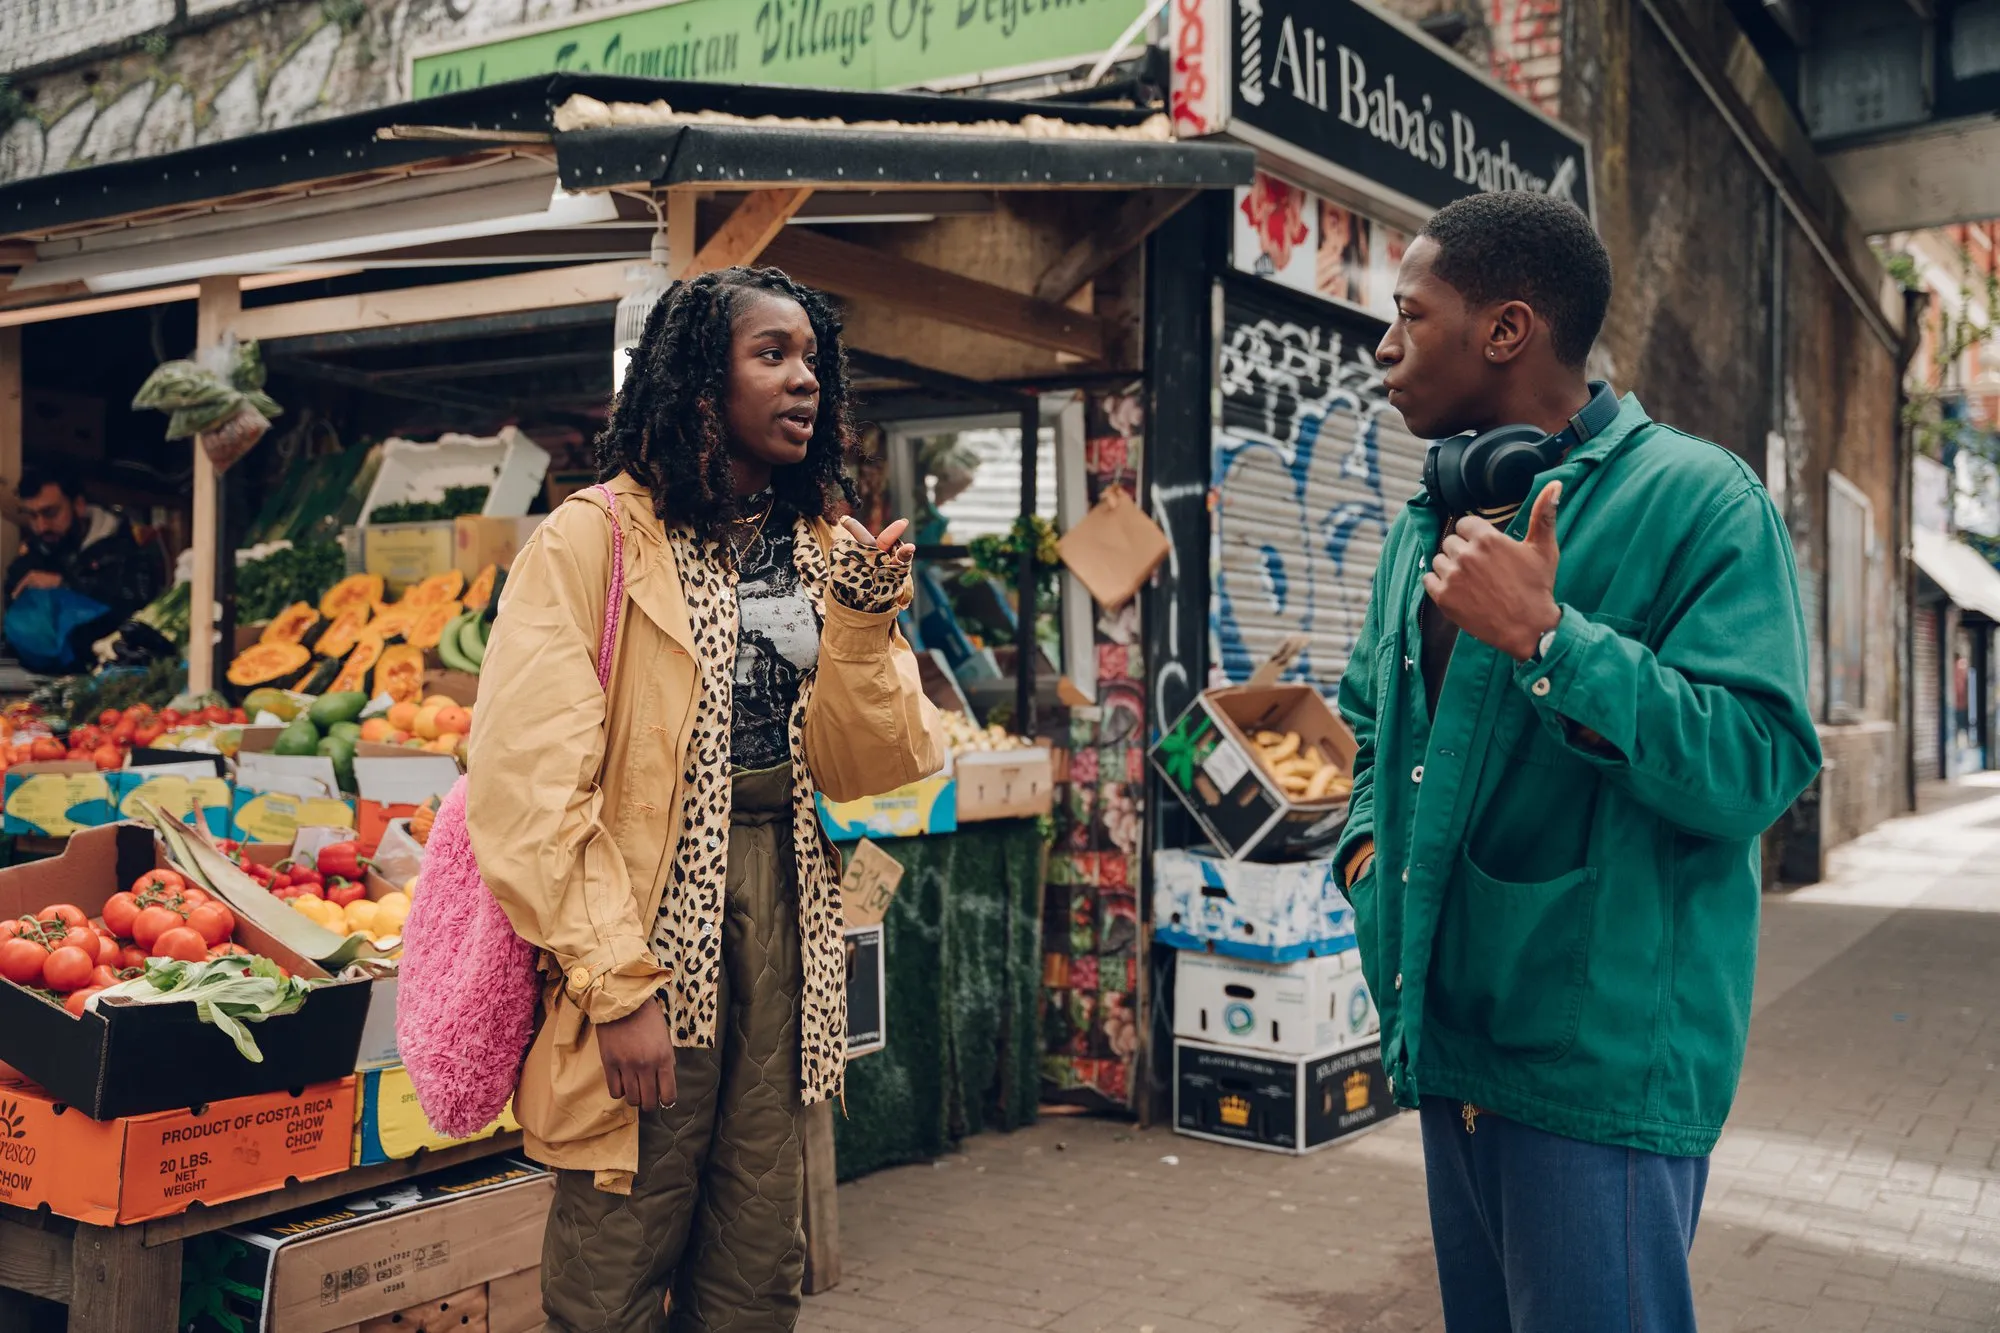 Vivian Oparah and David Jonsson stand talking at a street corner in South London in the film Rye Lane. Photo courtesy of Searchlight Pictures.